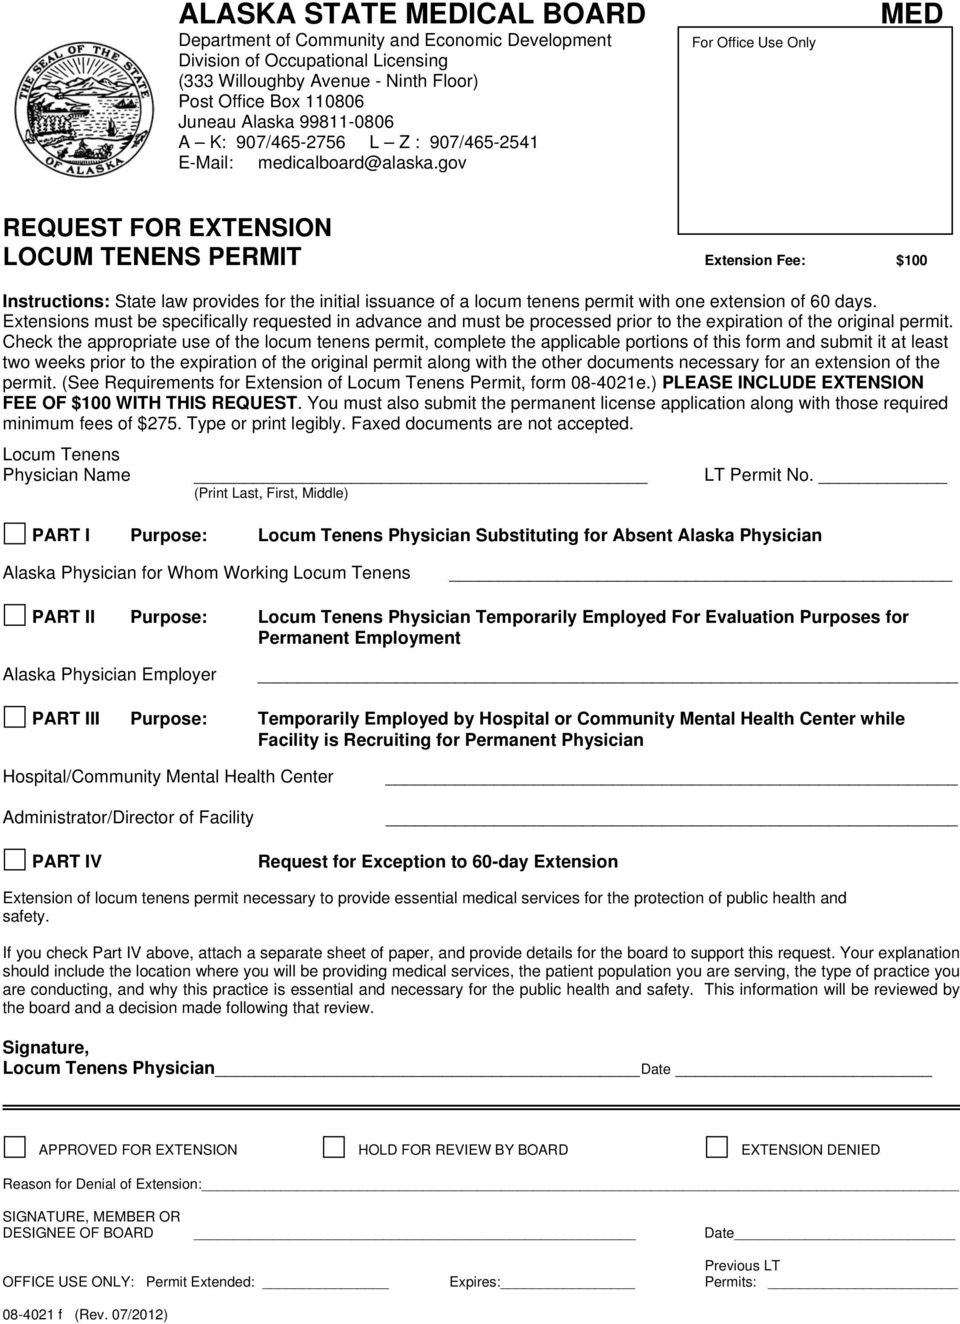 gov For Office Use Only MED REQUEST FOR EXTENSION LOCUM TENENS PERMIT Extension Fee: $100 Instructions: State law provides for the initial issuance of a locum tenens permit with one extension of 60